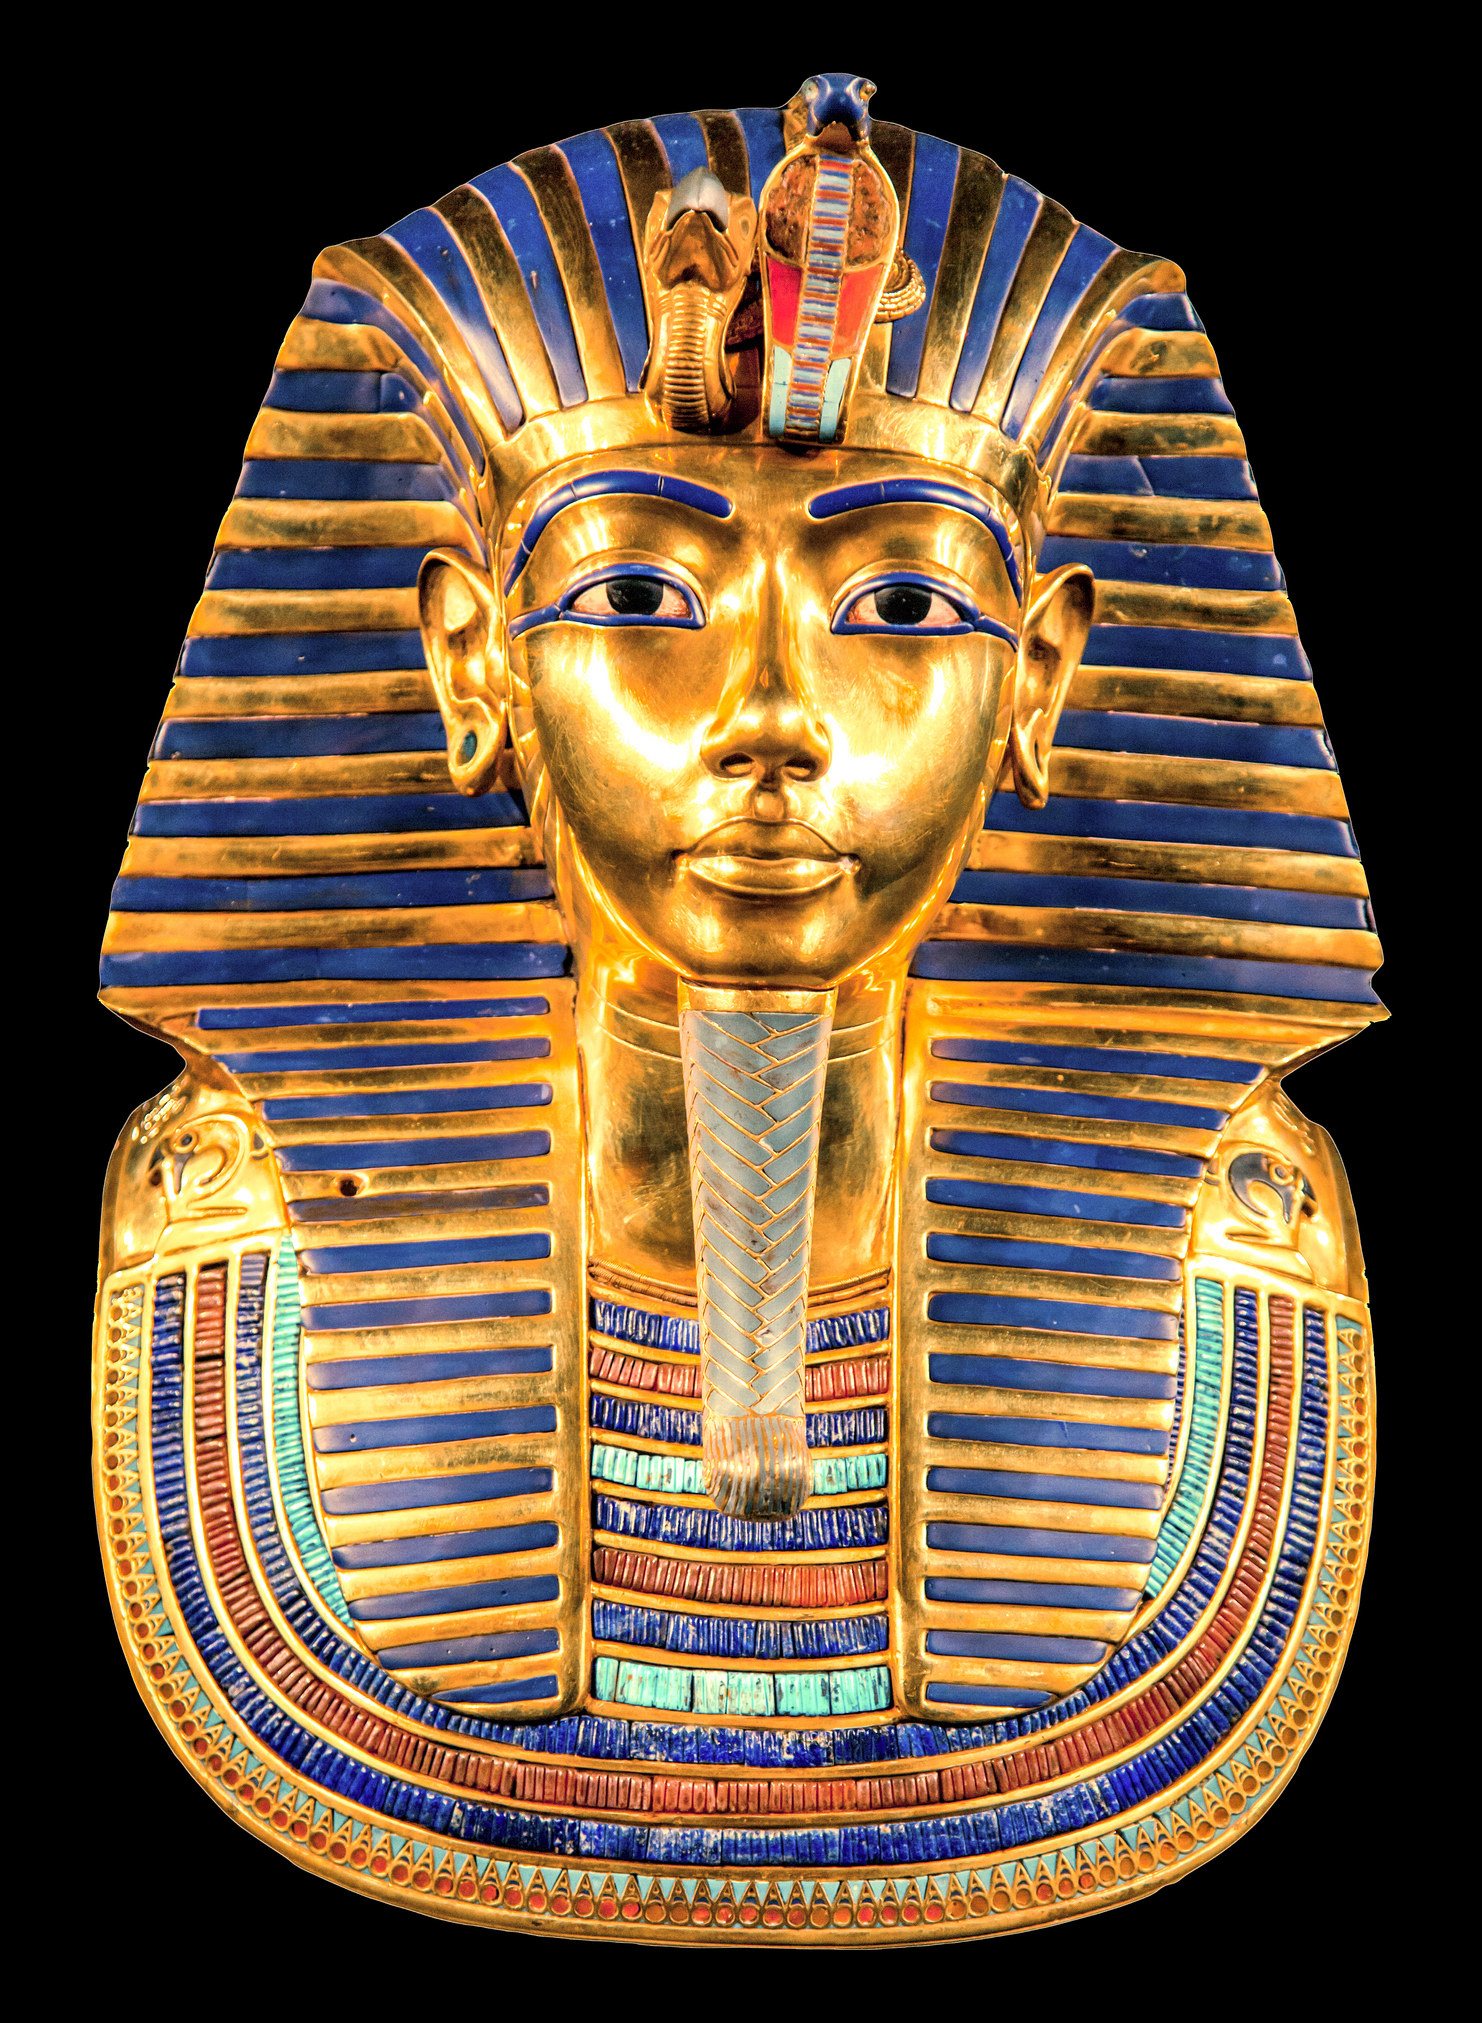 King Tut colorful death mask from the front